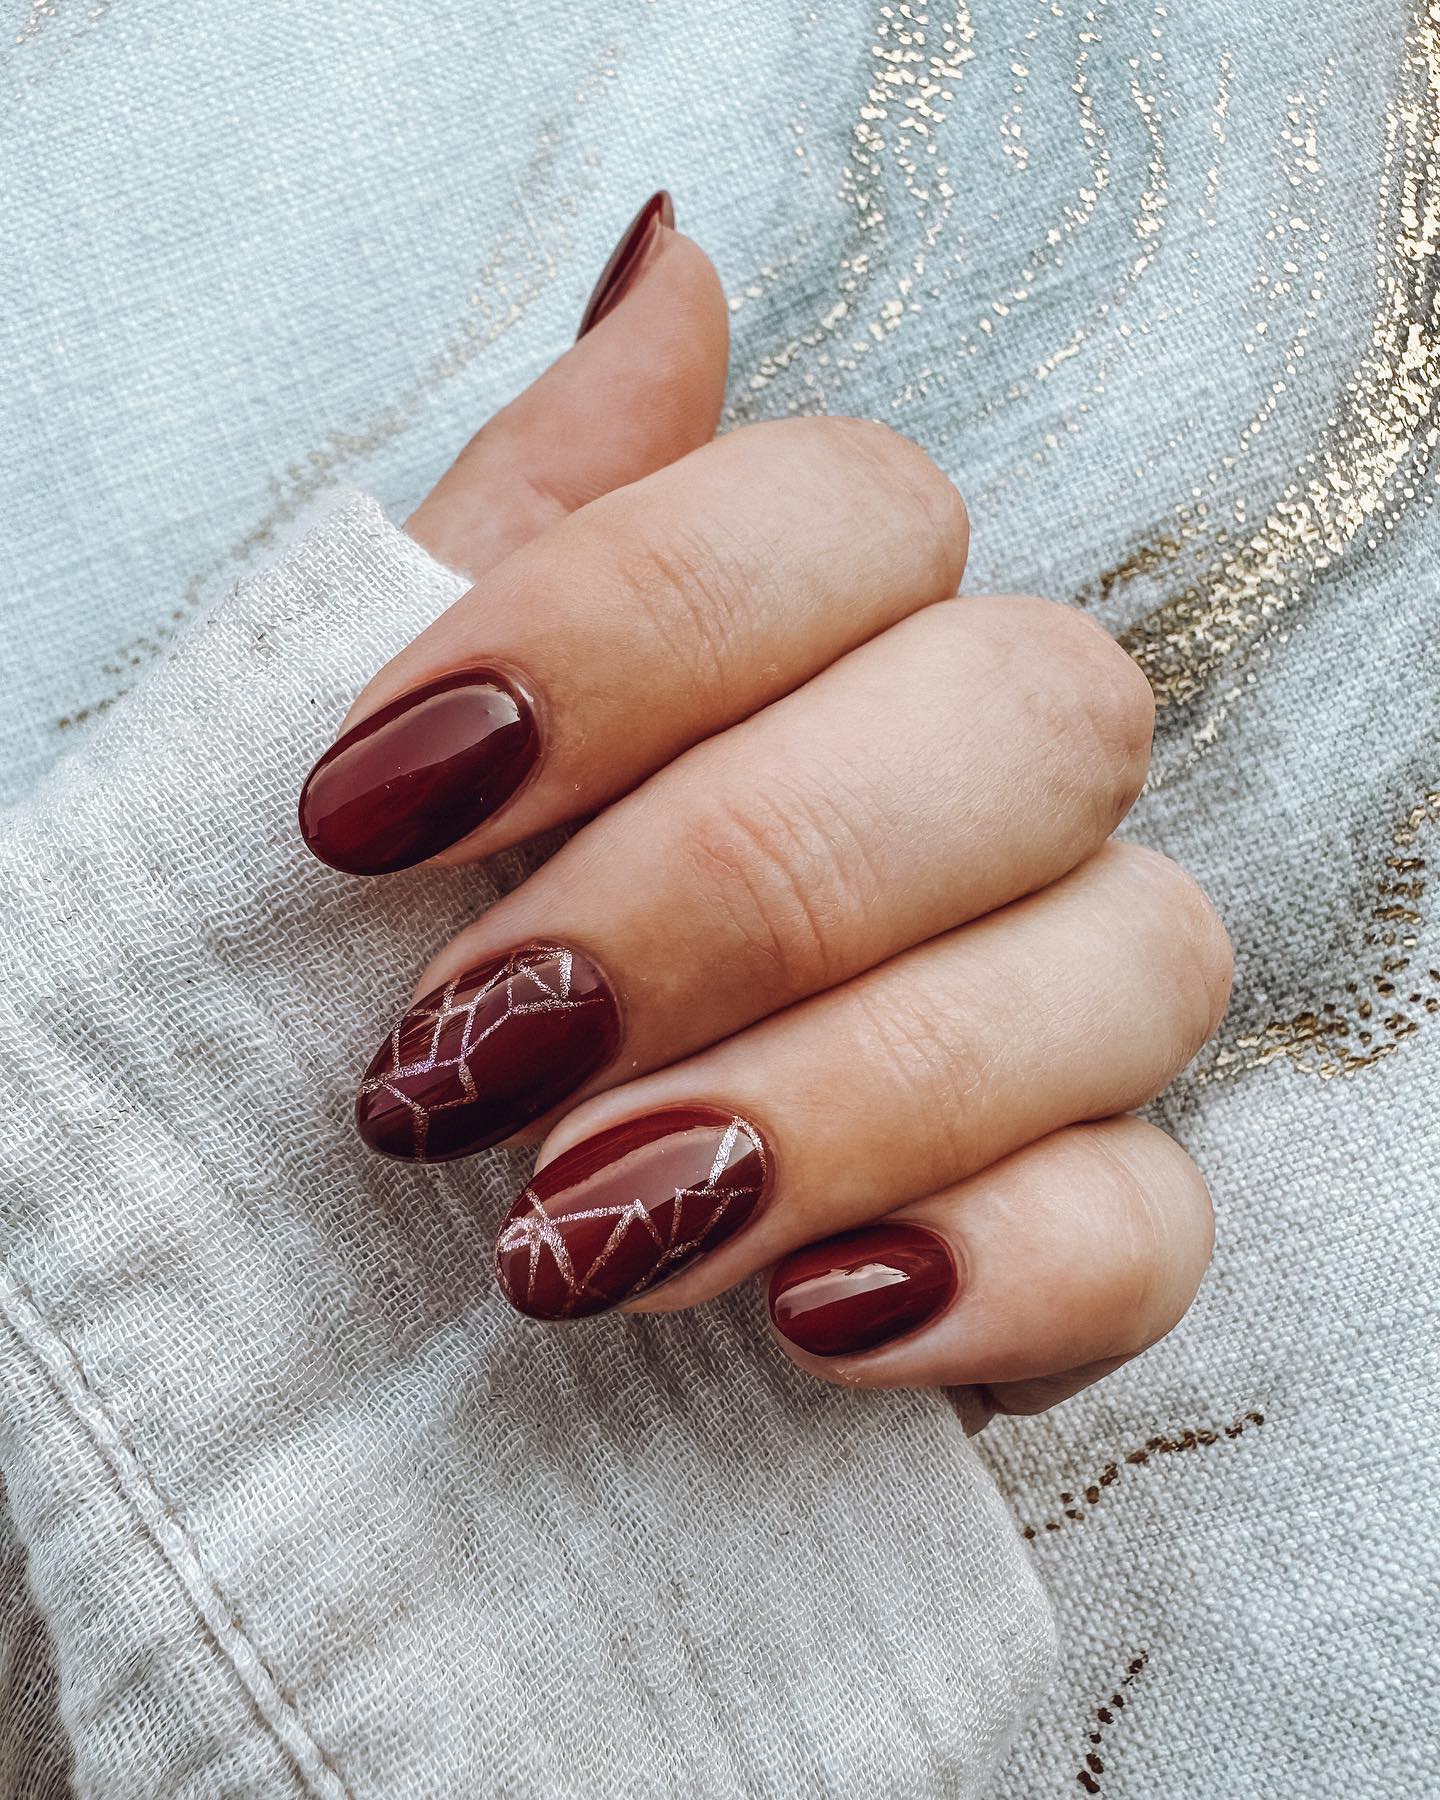 Closeup Of Woman Fingers With Nail Art Maroon Nail Polish High-Res Stock  Photo - Getty Images